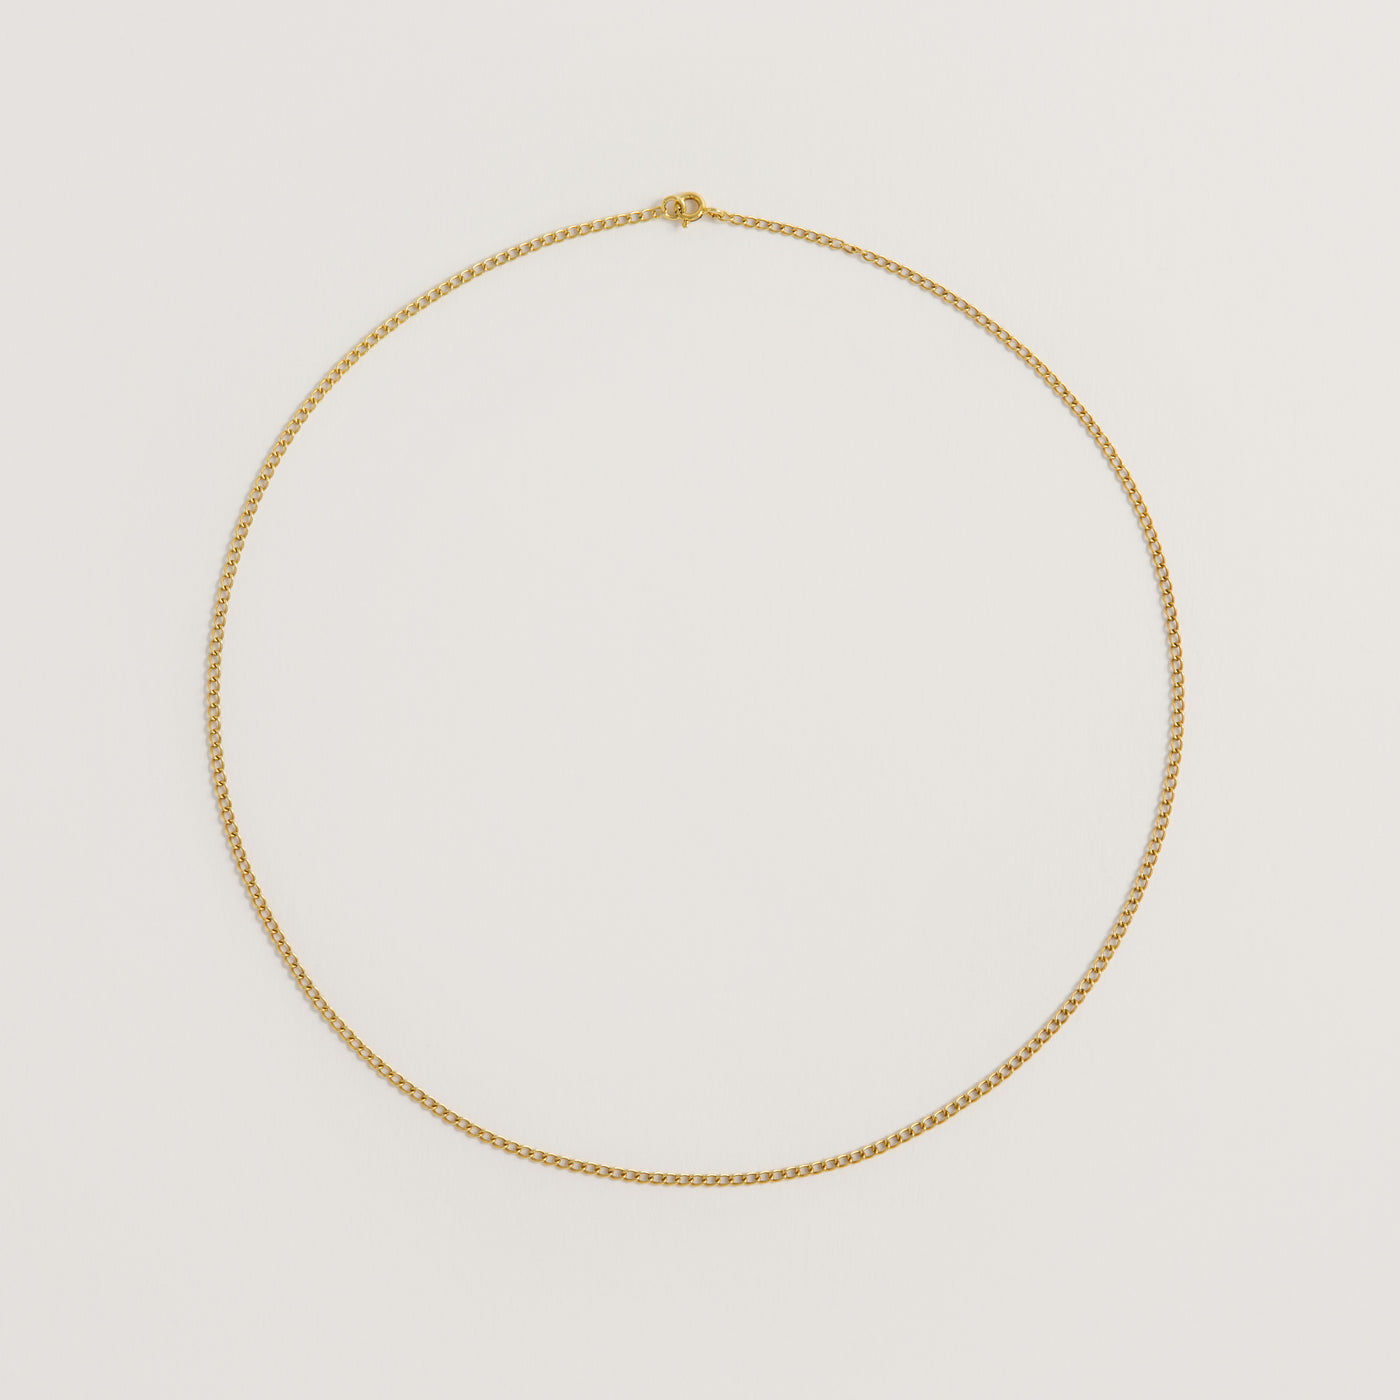 30inch 22ct gold chain on tonal background from Freya Rose London